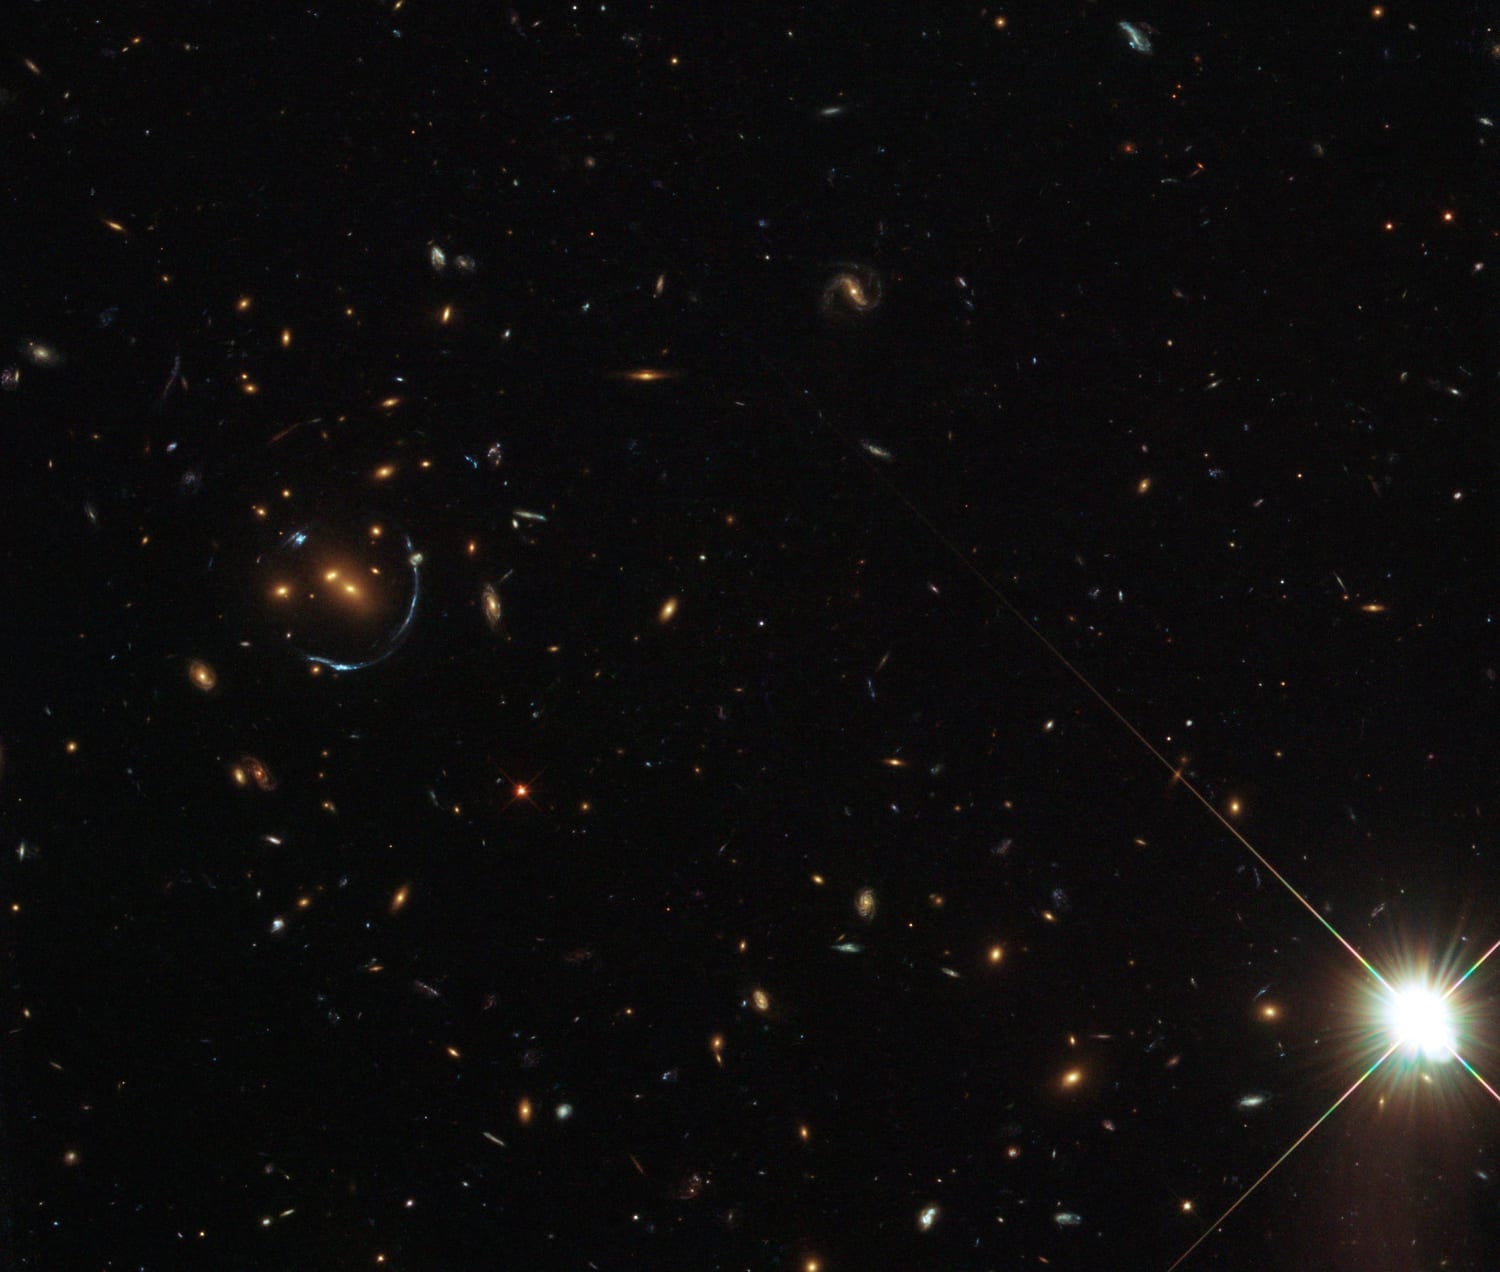 LRG-4-606, and a gravitational lens of an even more distant galaxy. LRG is the acronym given to a catalog of Luminous Red Galaxies found in the Sloan Digital Sky Survey (SDSS). These are mostly really massive elliptical galaxies full of huge numbers of old stars. (Image:NASA/Hubble)